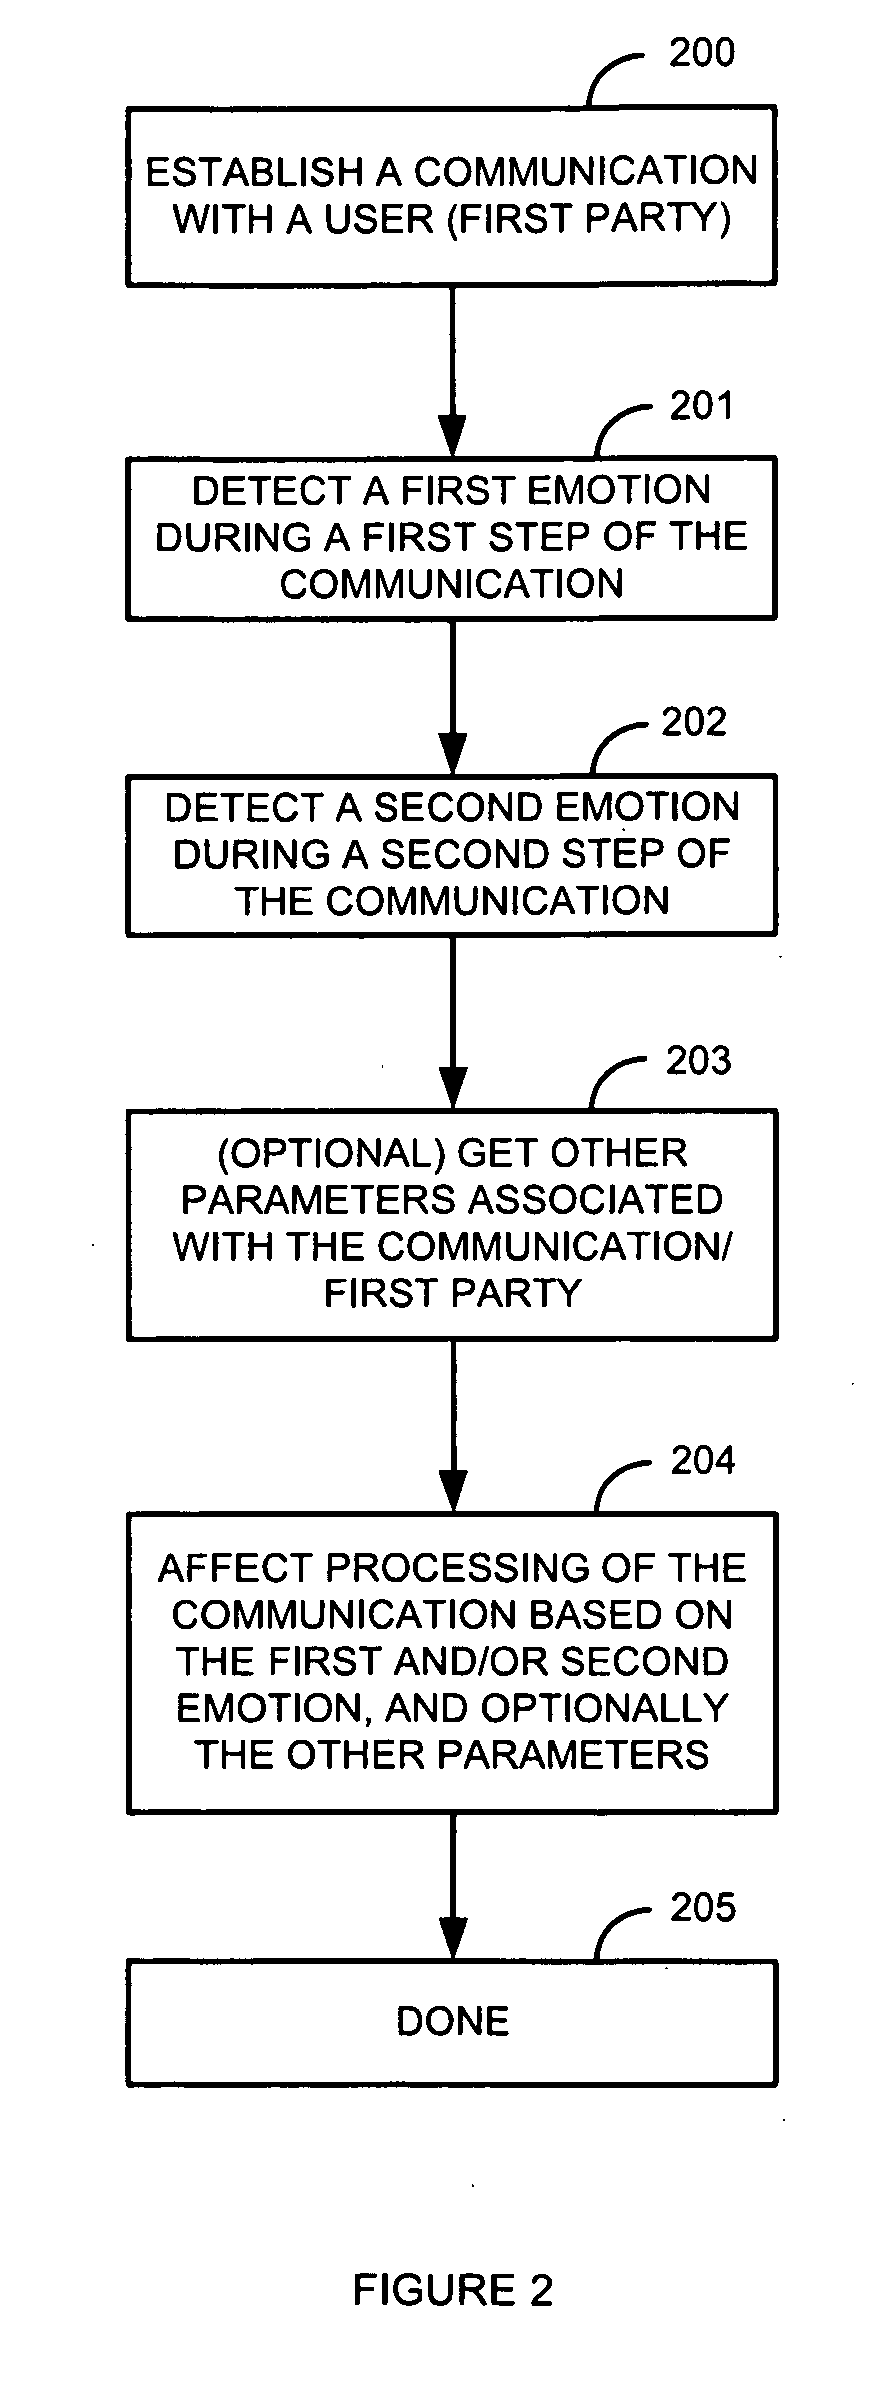 System and Method for Detecting Emotions at Different Steps in a Communication